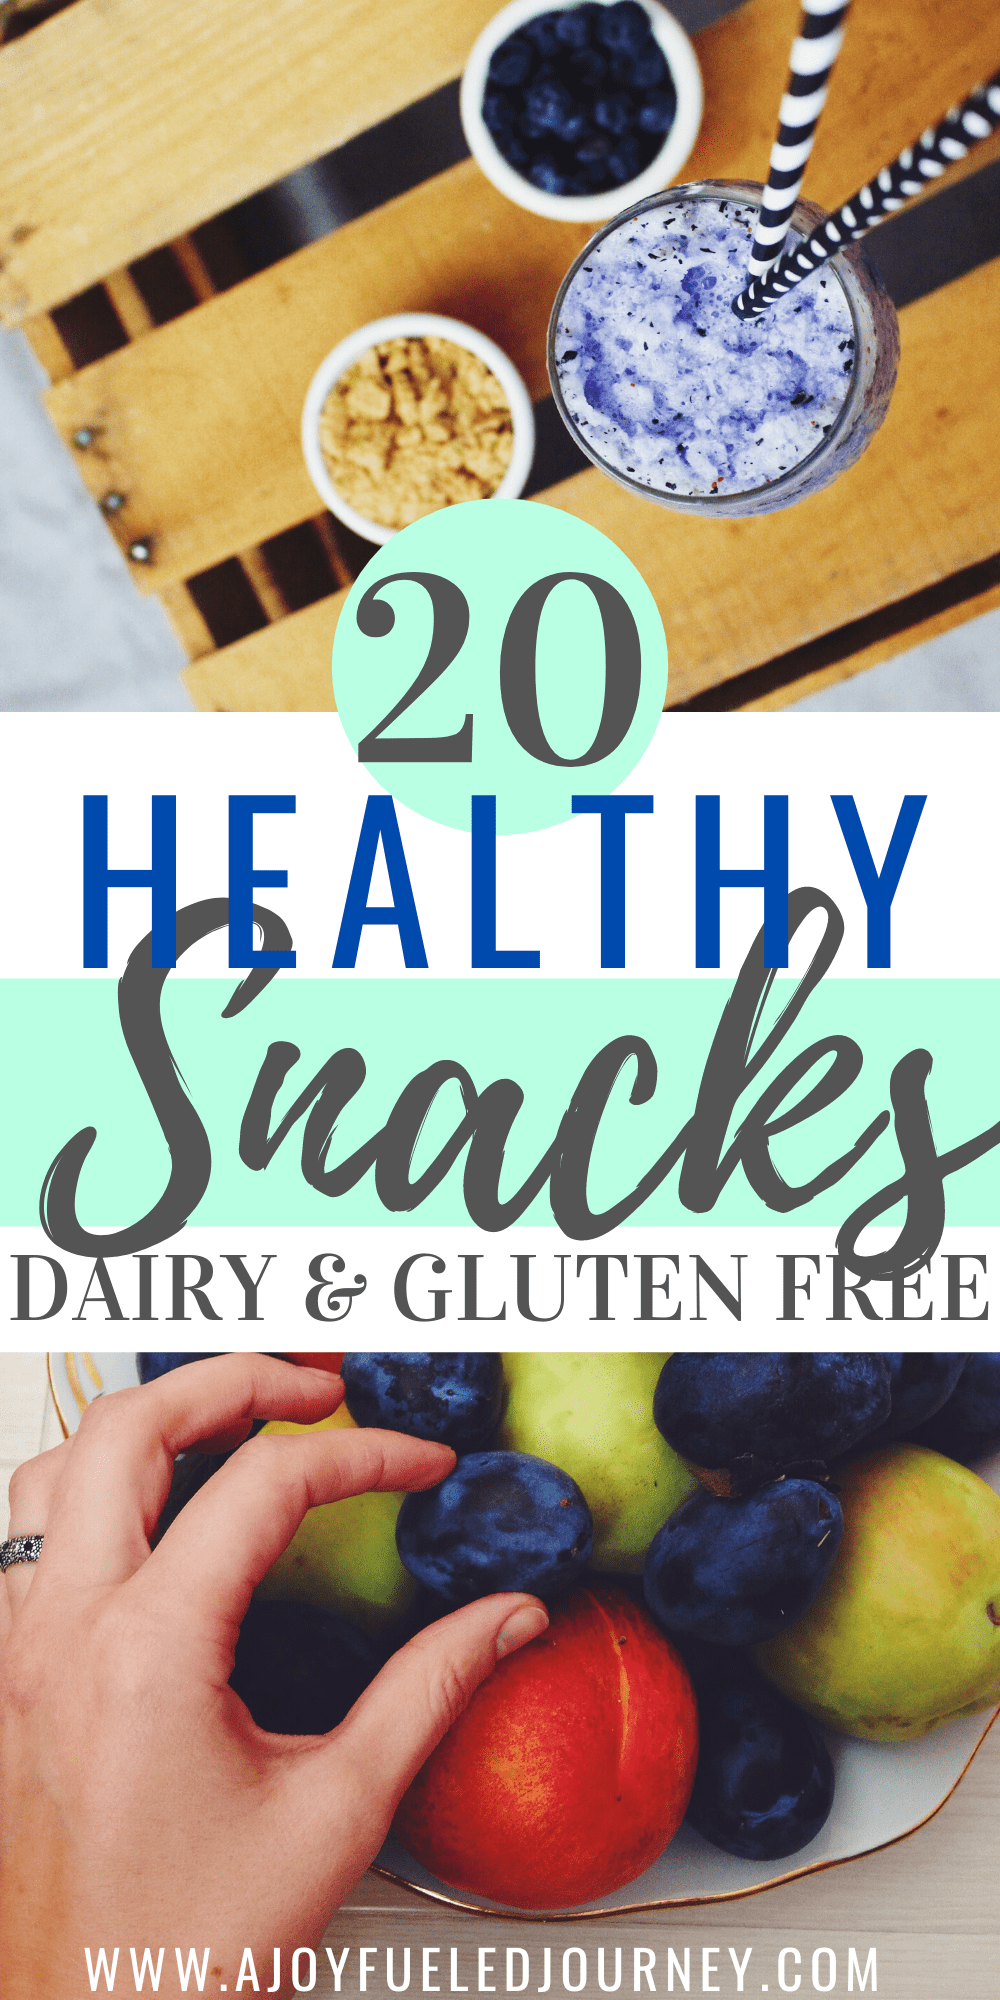 20 Gluten Free and Dairy Free Snack Ideas | A Joy Fueled Journey